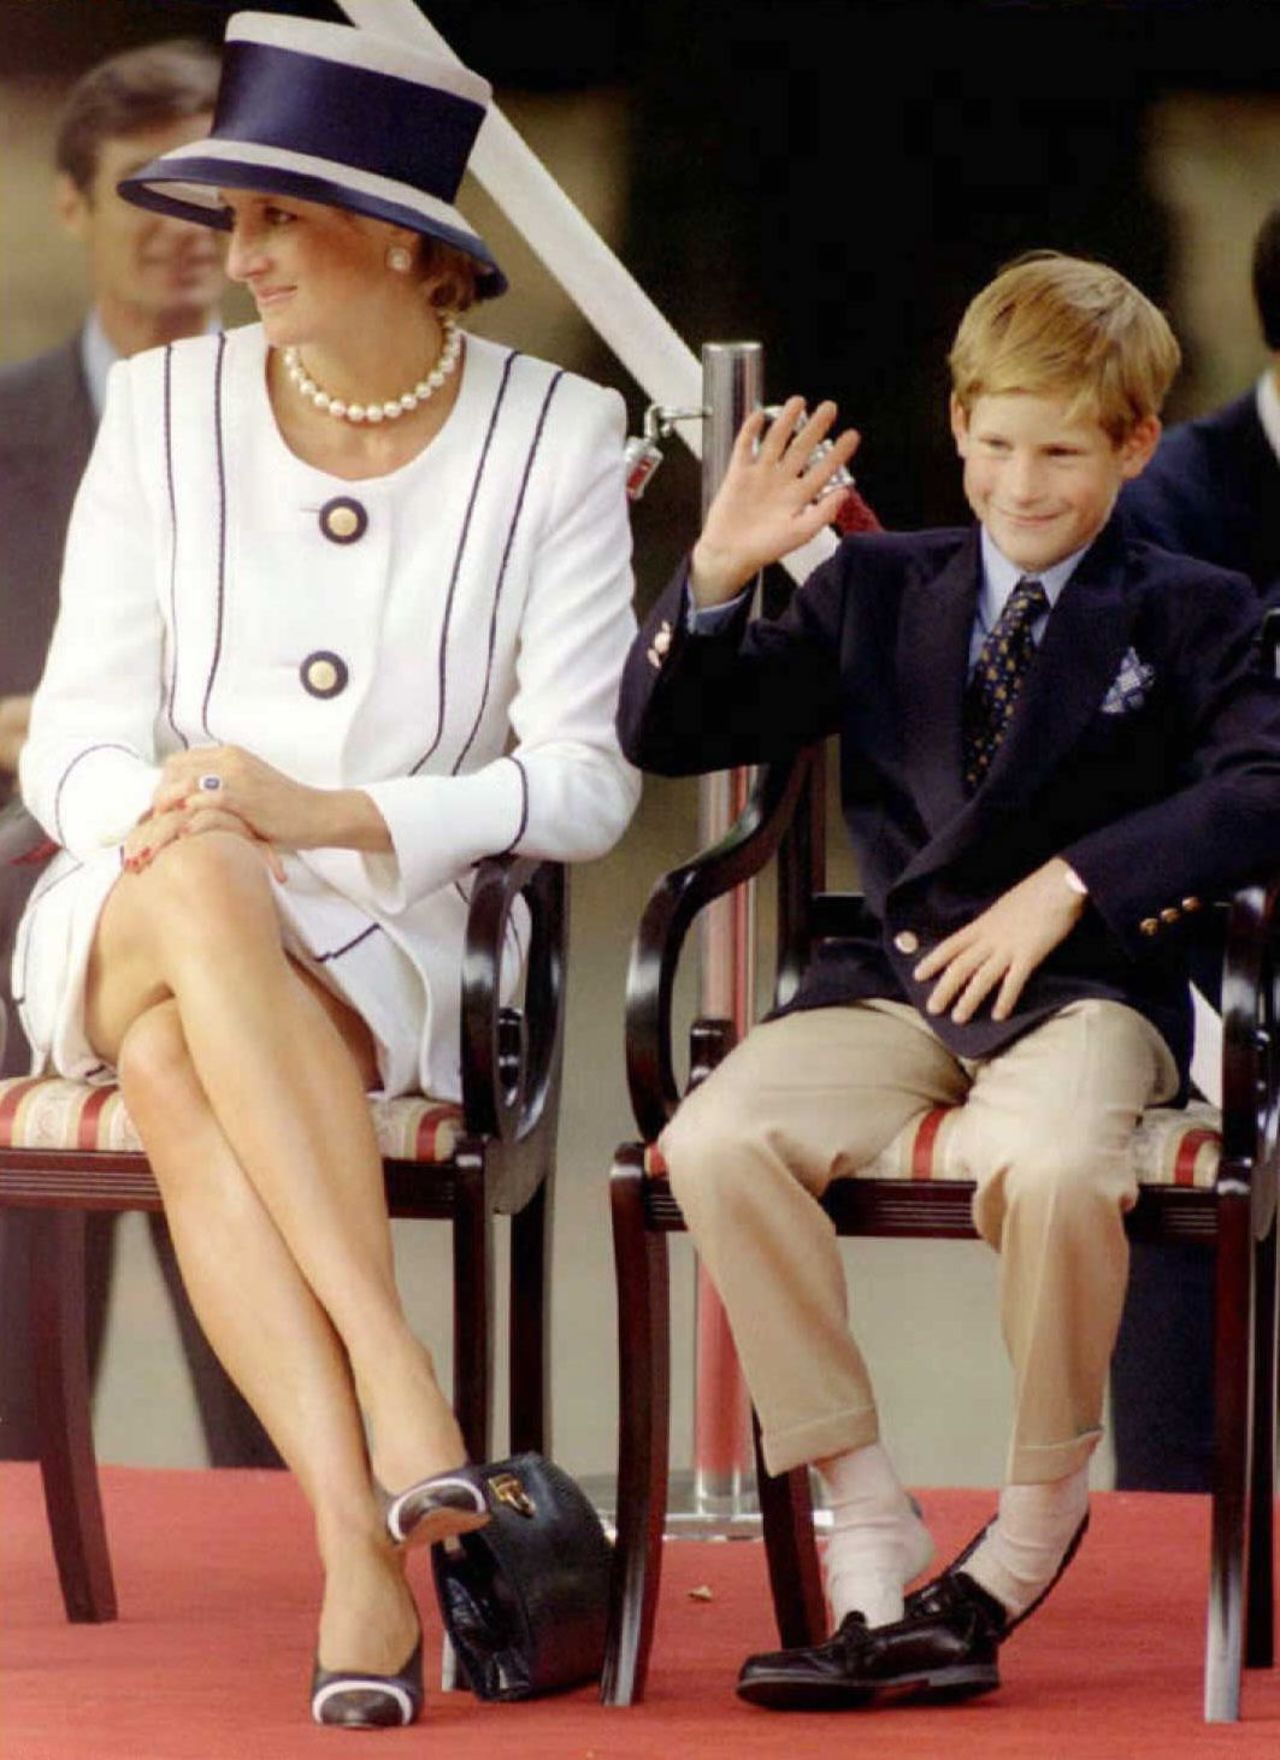 August 1995: Princess Diana and her son Harry attend an event commemorating VJ Day.